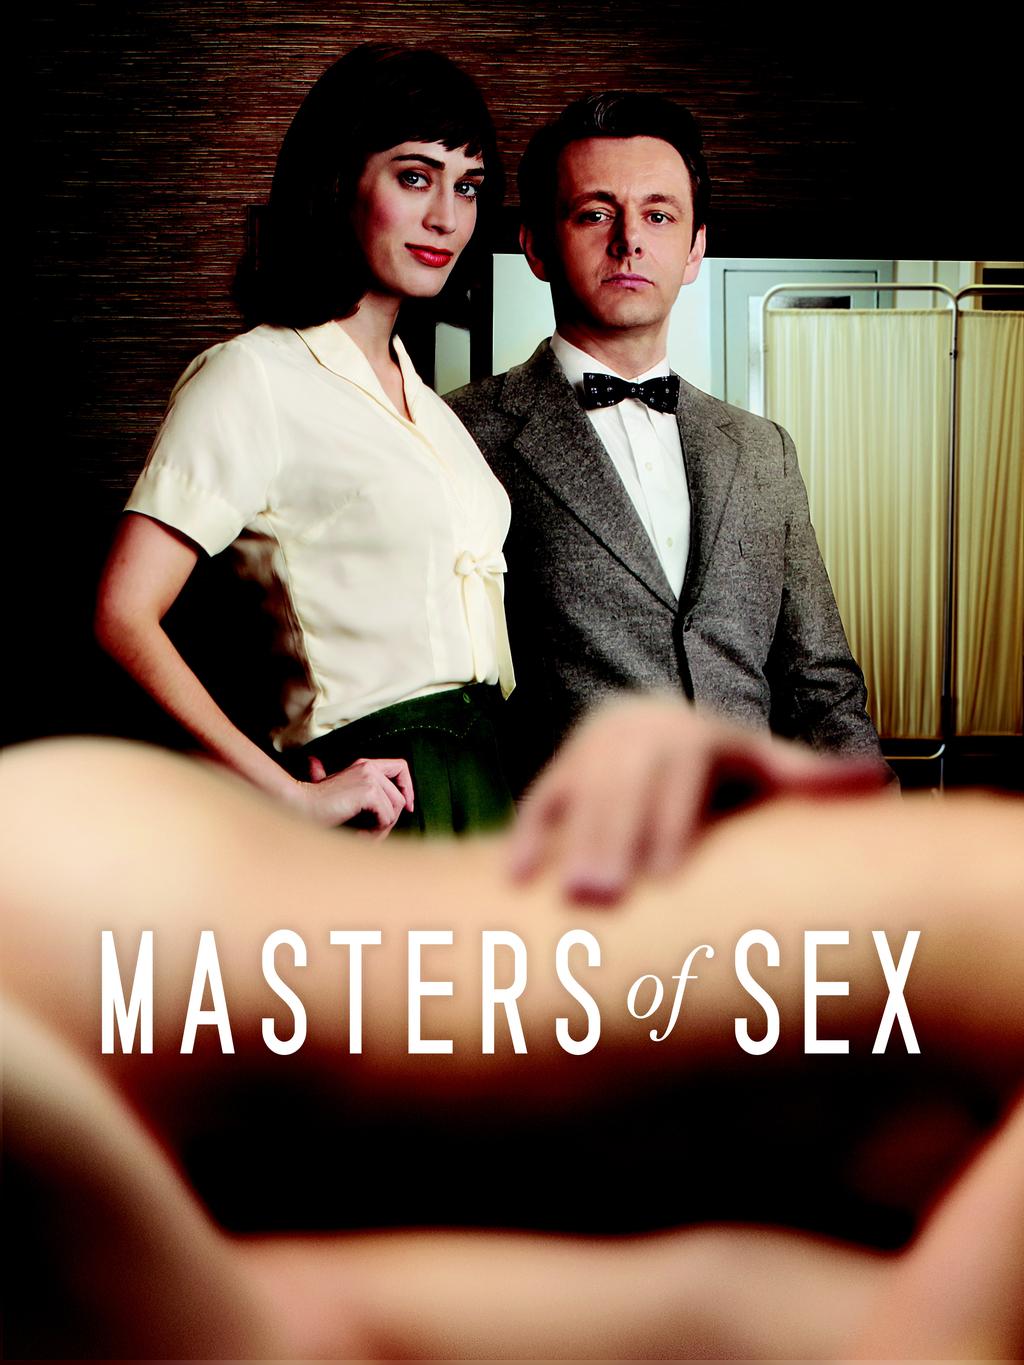 MASTERS OF SEX One-Hour Drama Series Written/Executive Produced by Michelle Ashford (The Pacific) Executive Produced by Sarah Timberman & Carl Beverly (Justified, Unforgettable) Directed by John